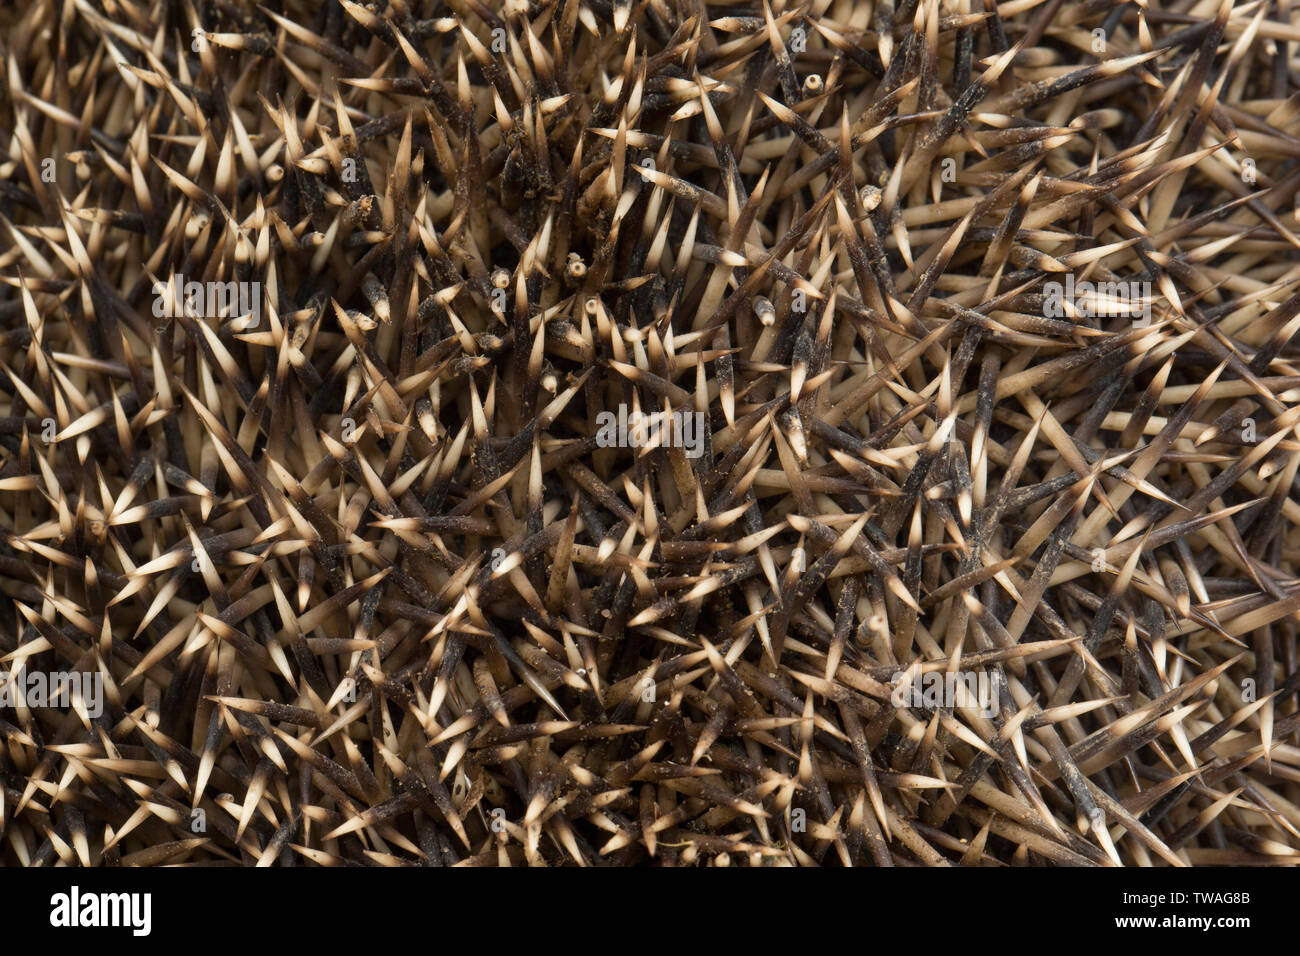 A close-up picture of the spines on a European hedgehog, Erinaceus europaeus, photographed on a white background. Dorset England UK GB Stock Photo